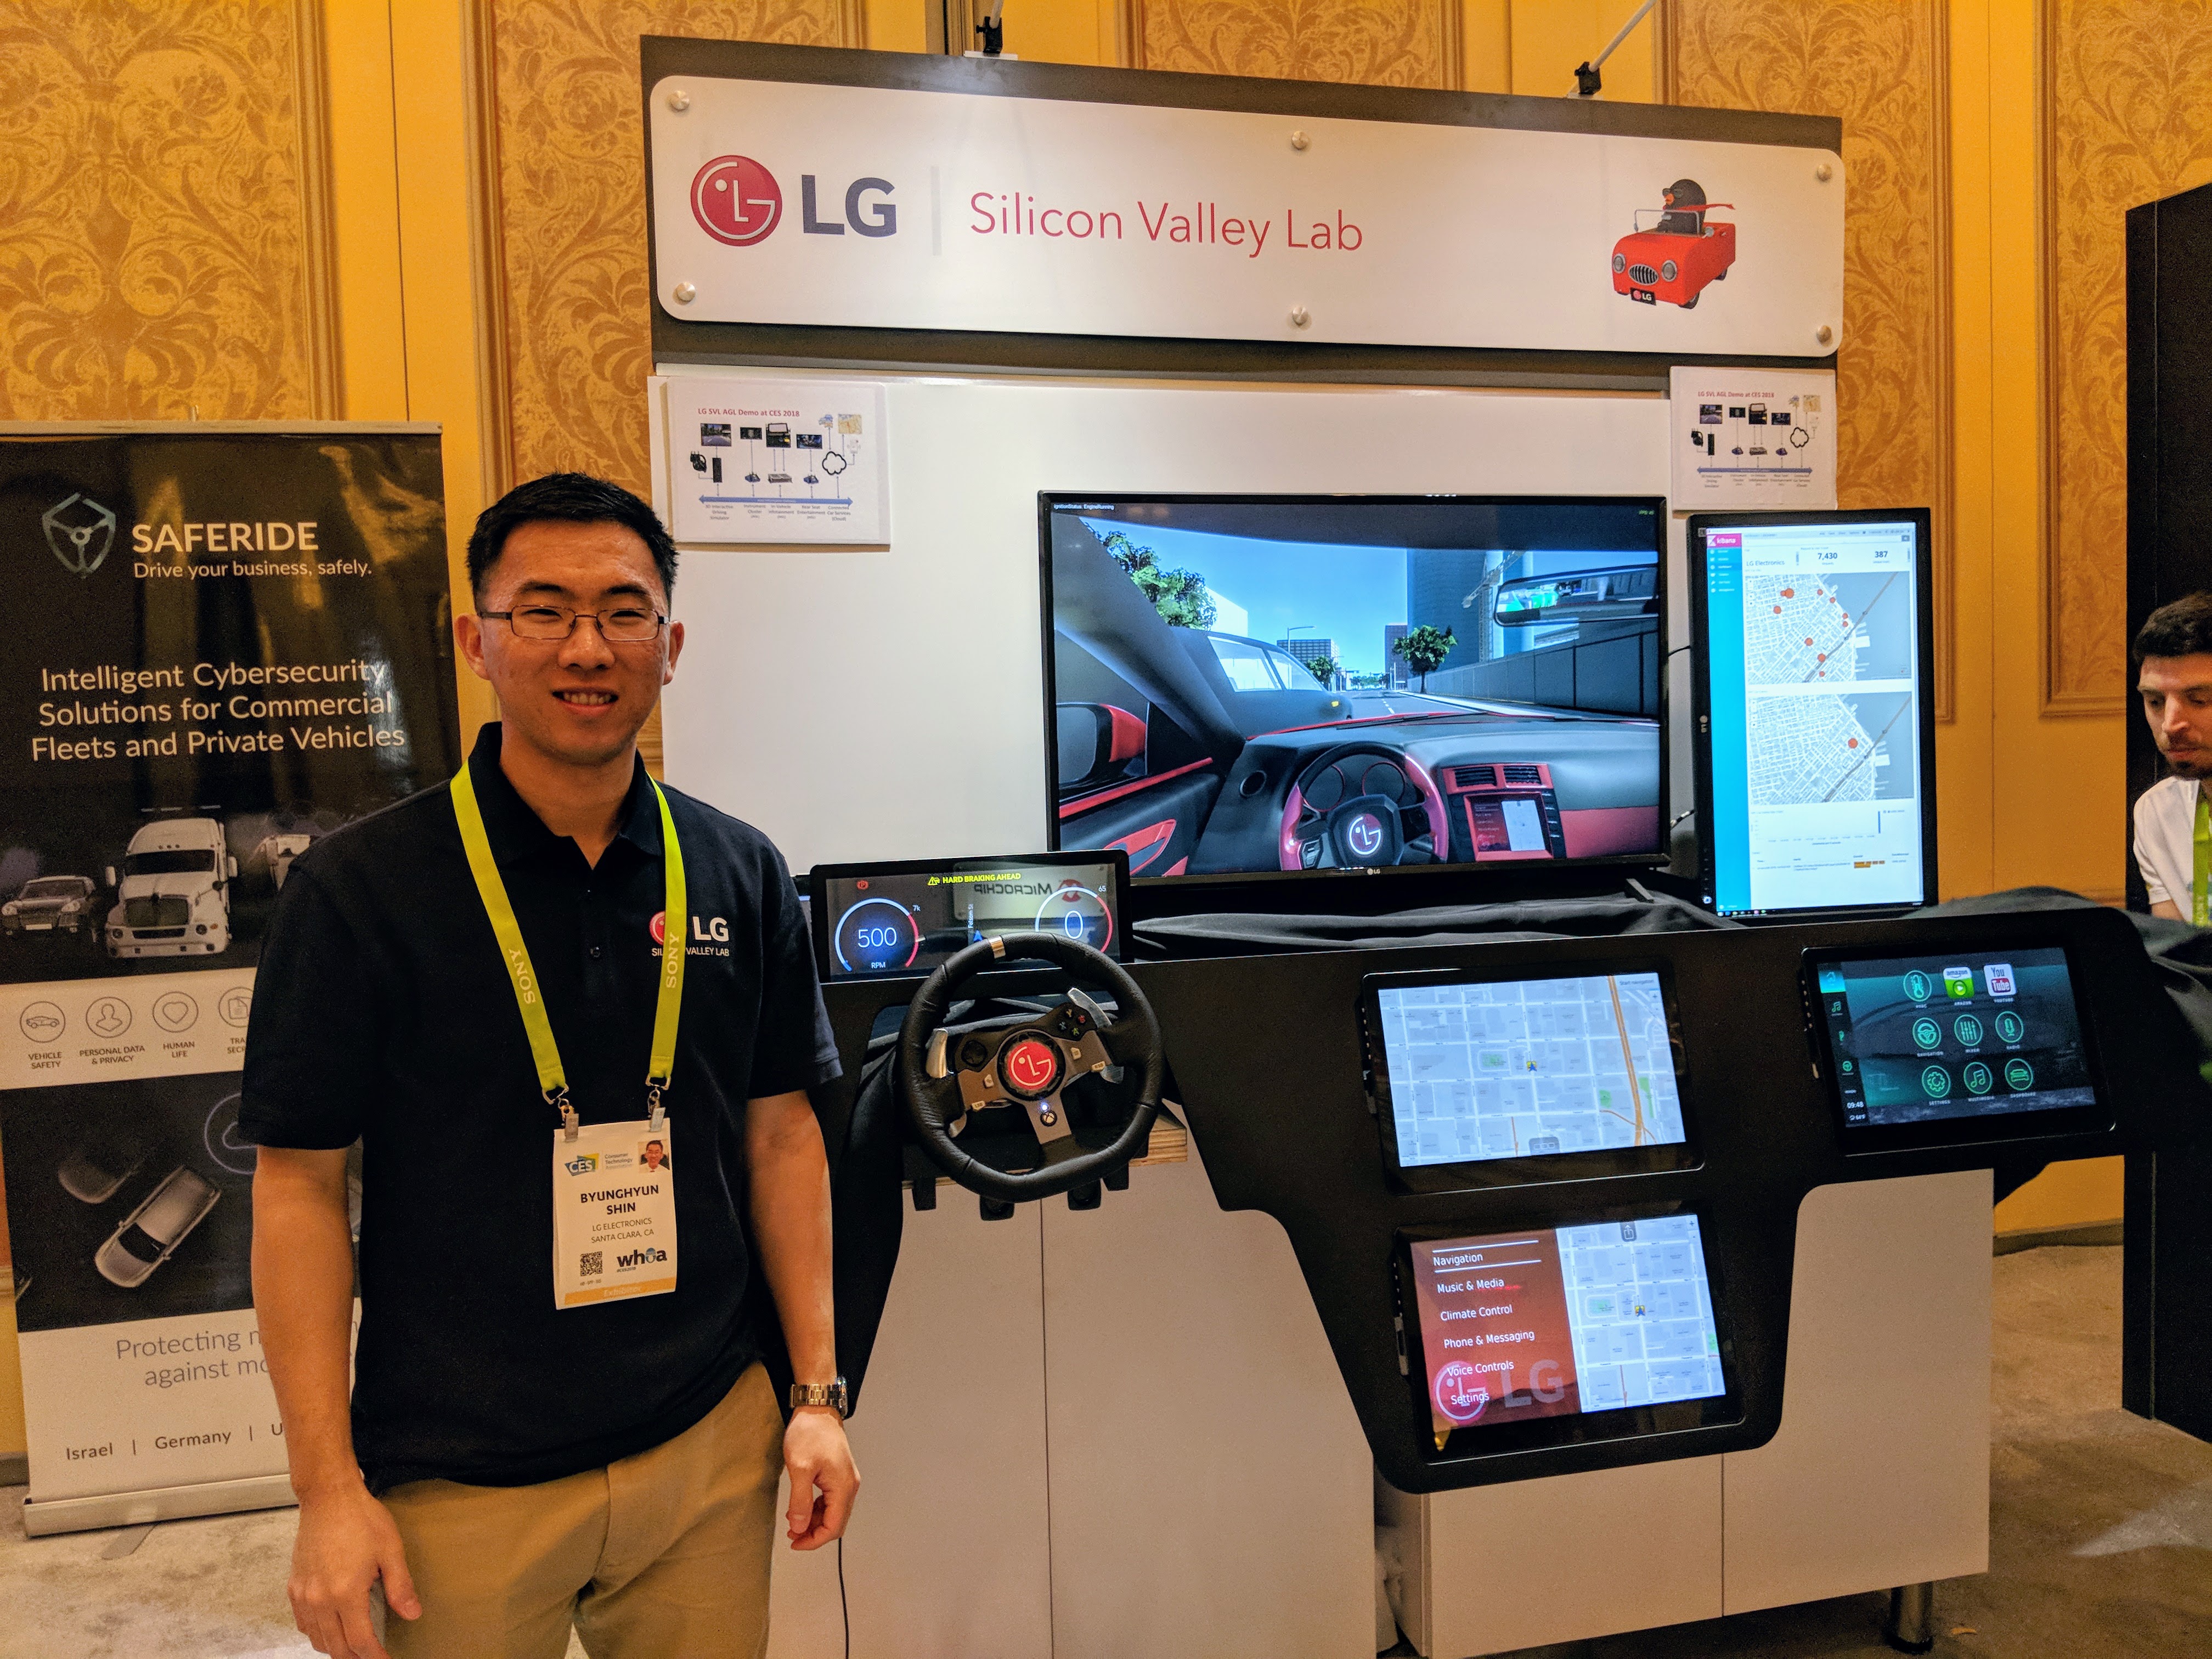 LG SVL's booth at the AGL exhibit, CES 2018